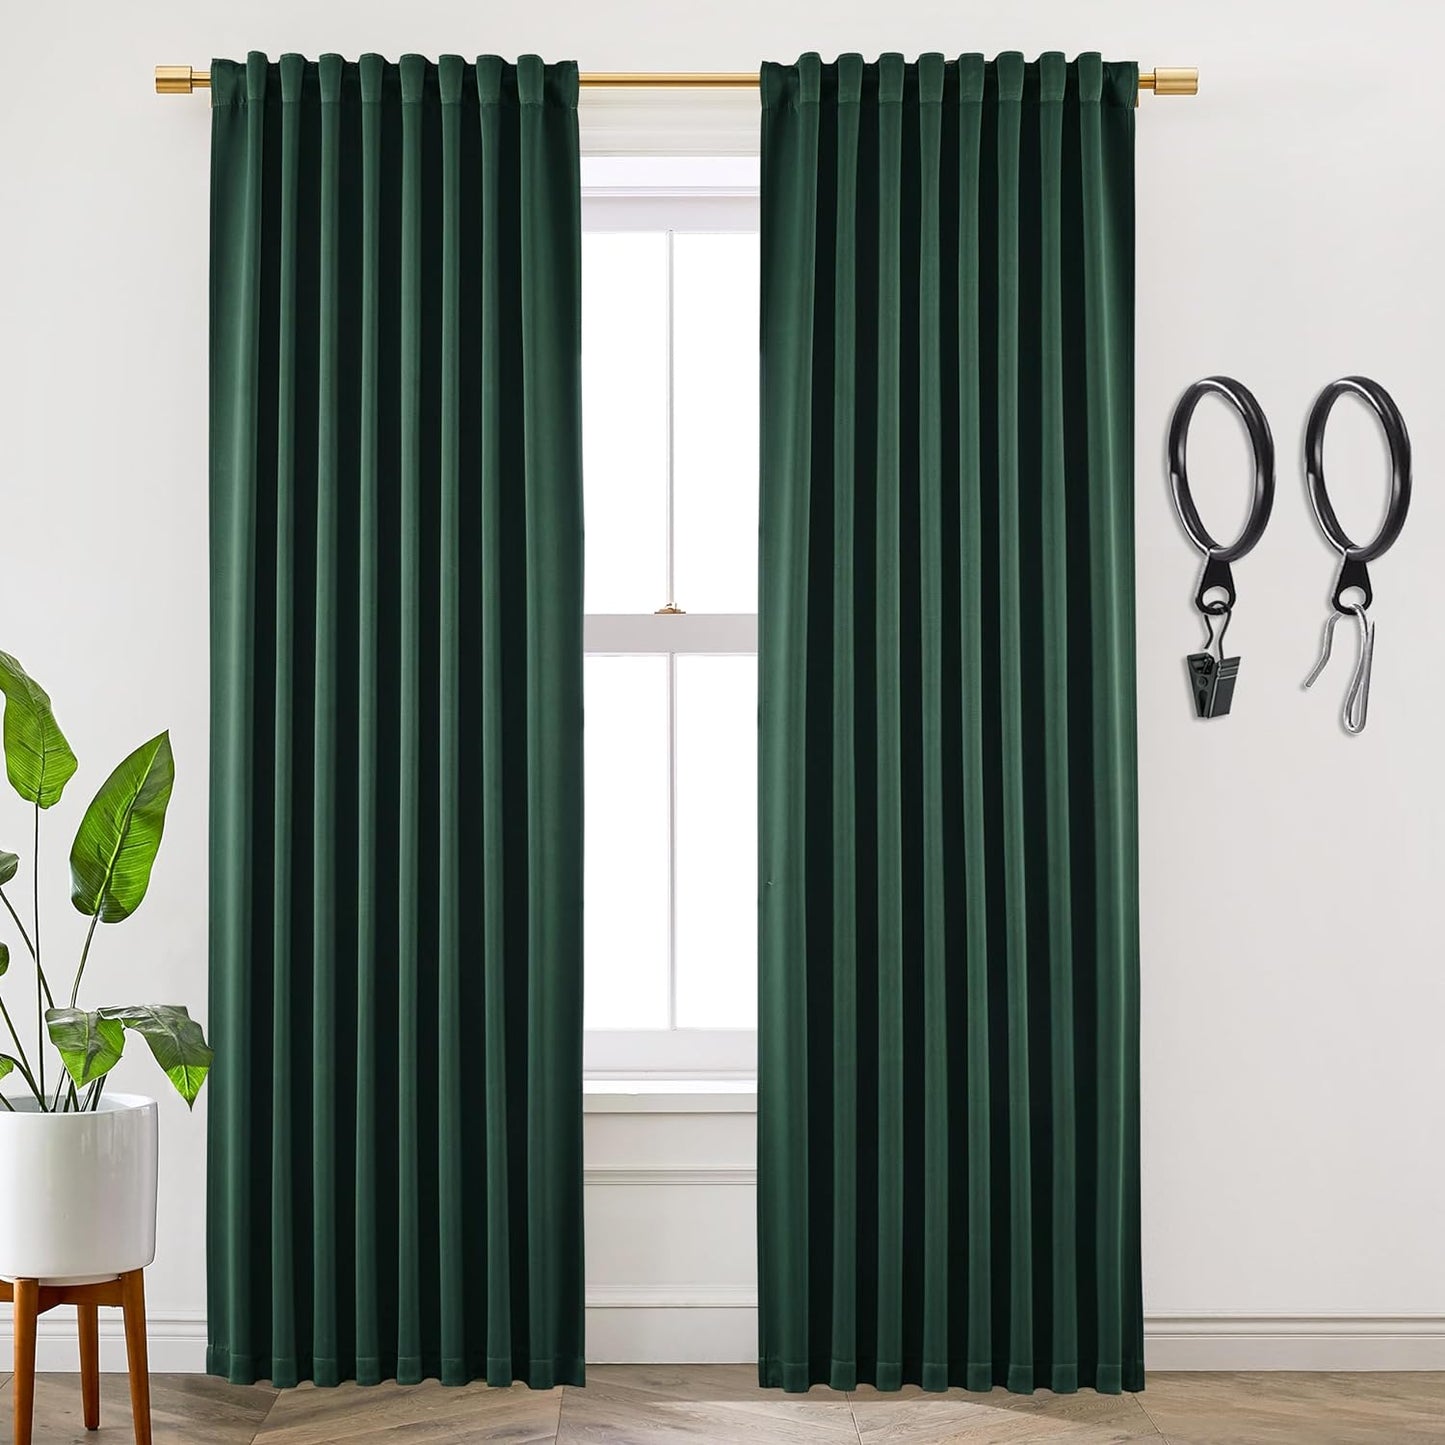 SHINELAND Beige Room Darkening Curtains 105 Inches Long for Living Room Bedroom,Cortinas Para Cuarto Bloqueador De Luz,Thermal Insulated Back Tab Pleat Blackout Curtains for Sunroom Patio Door Indoor  SHINELAND Emerald Green 2X(52"Wx96"L) 